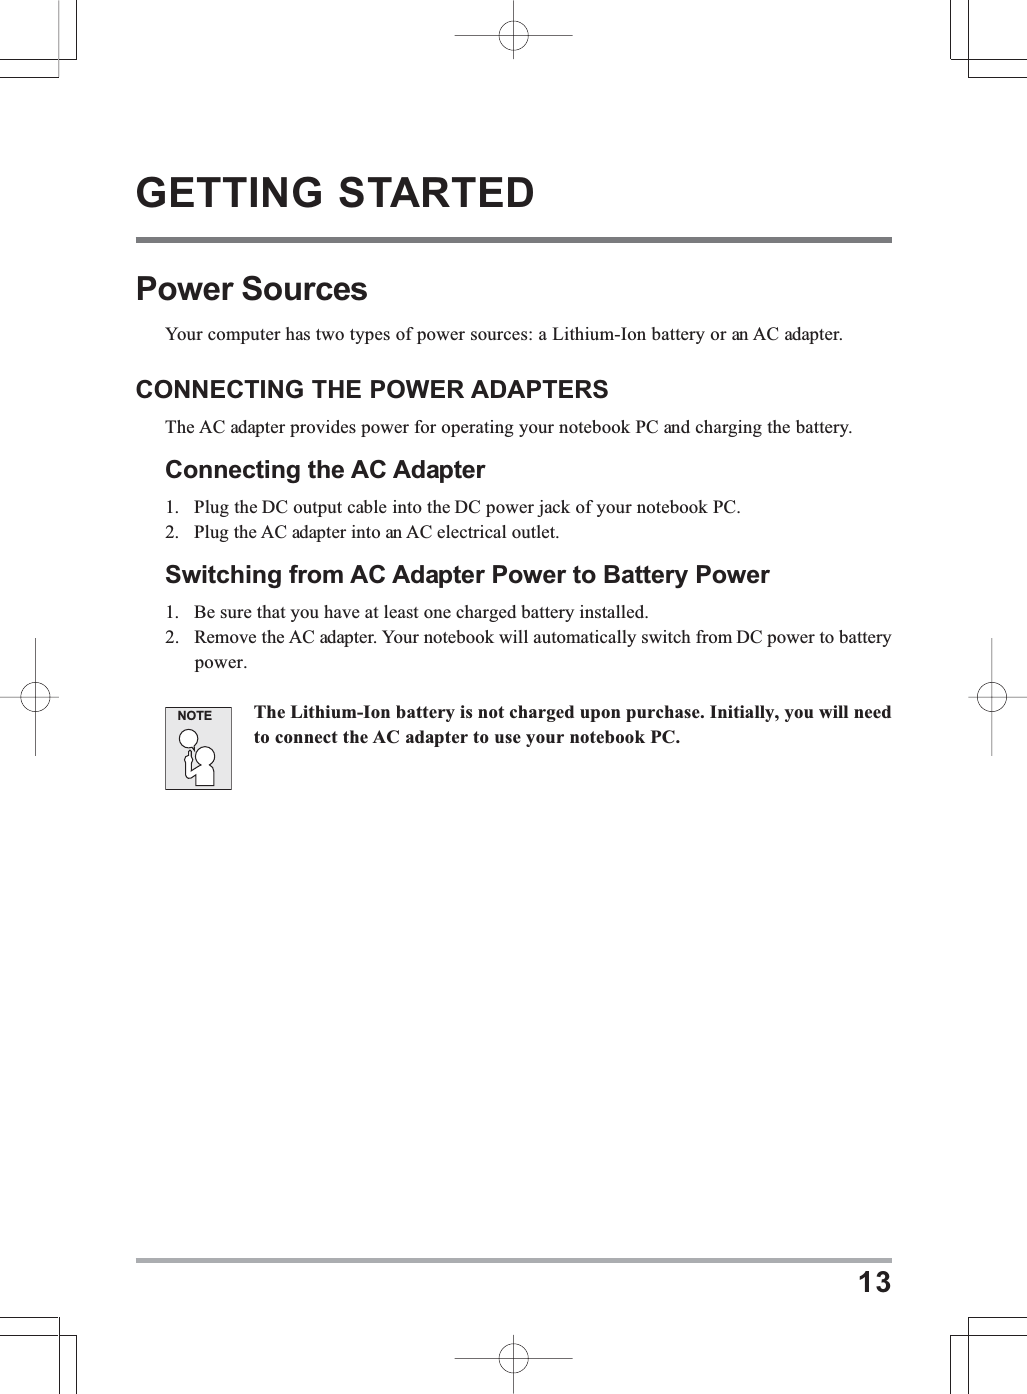 13GETTING STARTEDPower SourcesYour computer has two types of power sources: a Lithium-Ion battery or an AC adapter.CONNECTING THE POWER ADAPTERSThe AC adapter provides power for operating your notebook PC and charging the battery.Connecting the AC Adapter1. Plug the DC output cable into the DC power jack of your notebook PC.2. Plug the AC adapter into an AC electrical outlet.Switching from AC Adapter Power to Battery Power1. Be sure that you have at least one charged battery installed.2. Remove the AC adapter. Your notebook will automatically switch from DC power to batterypower.The Lithium-Ion battery is not charged upon purchase. Initially, you will needto connect the AC adapter to use your notebook PC.NOTE